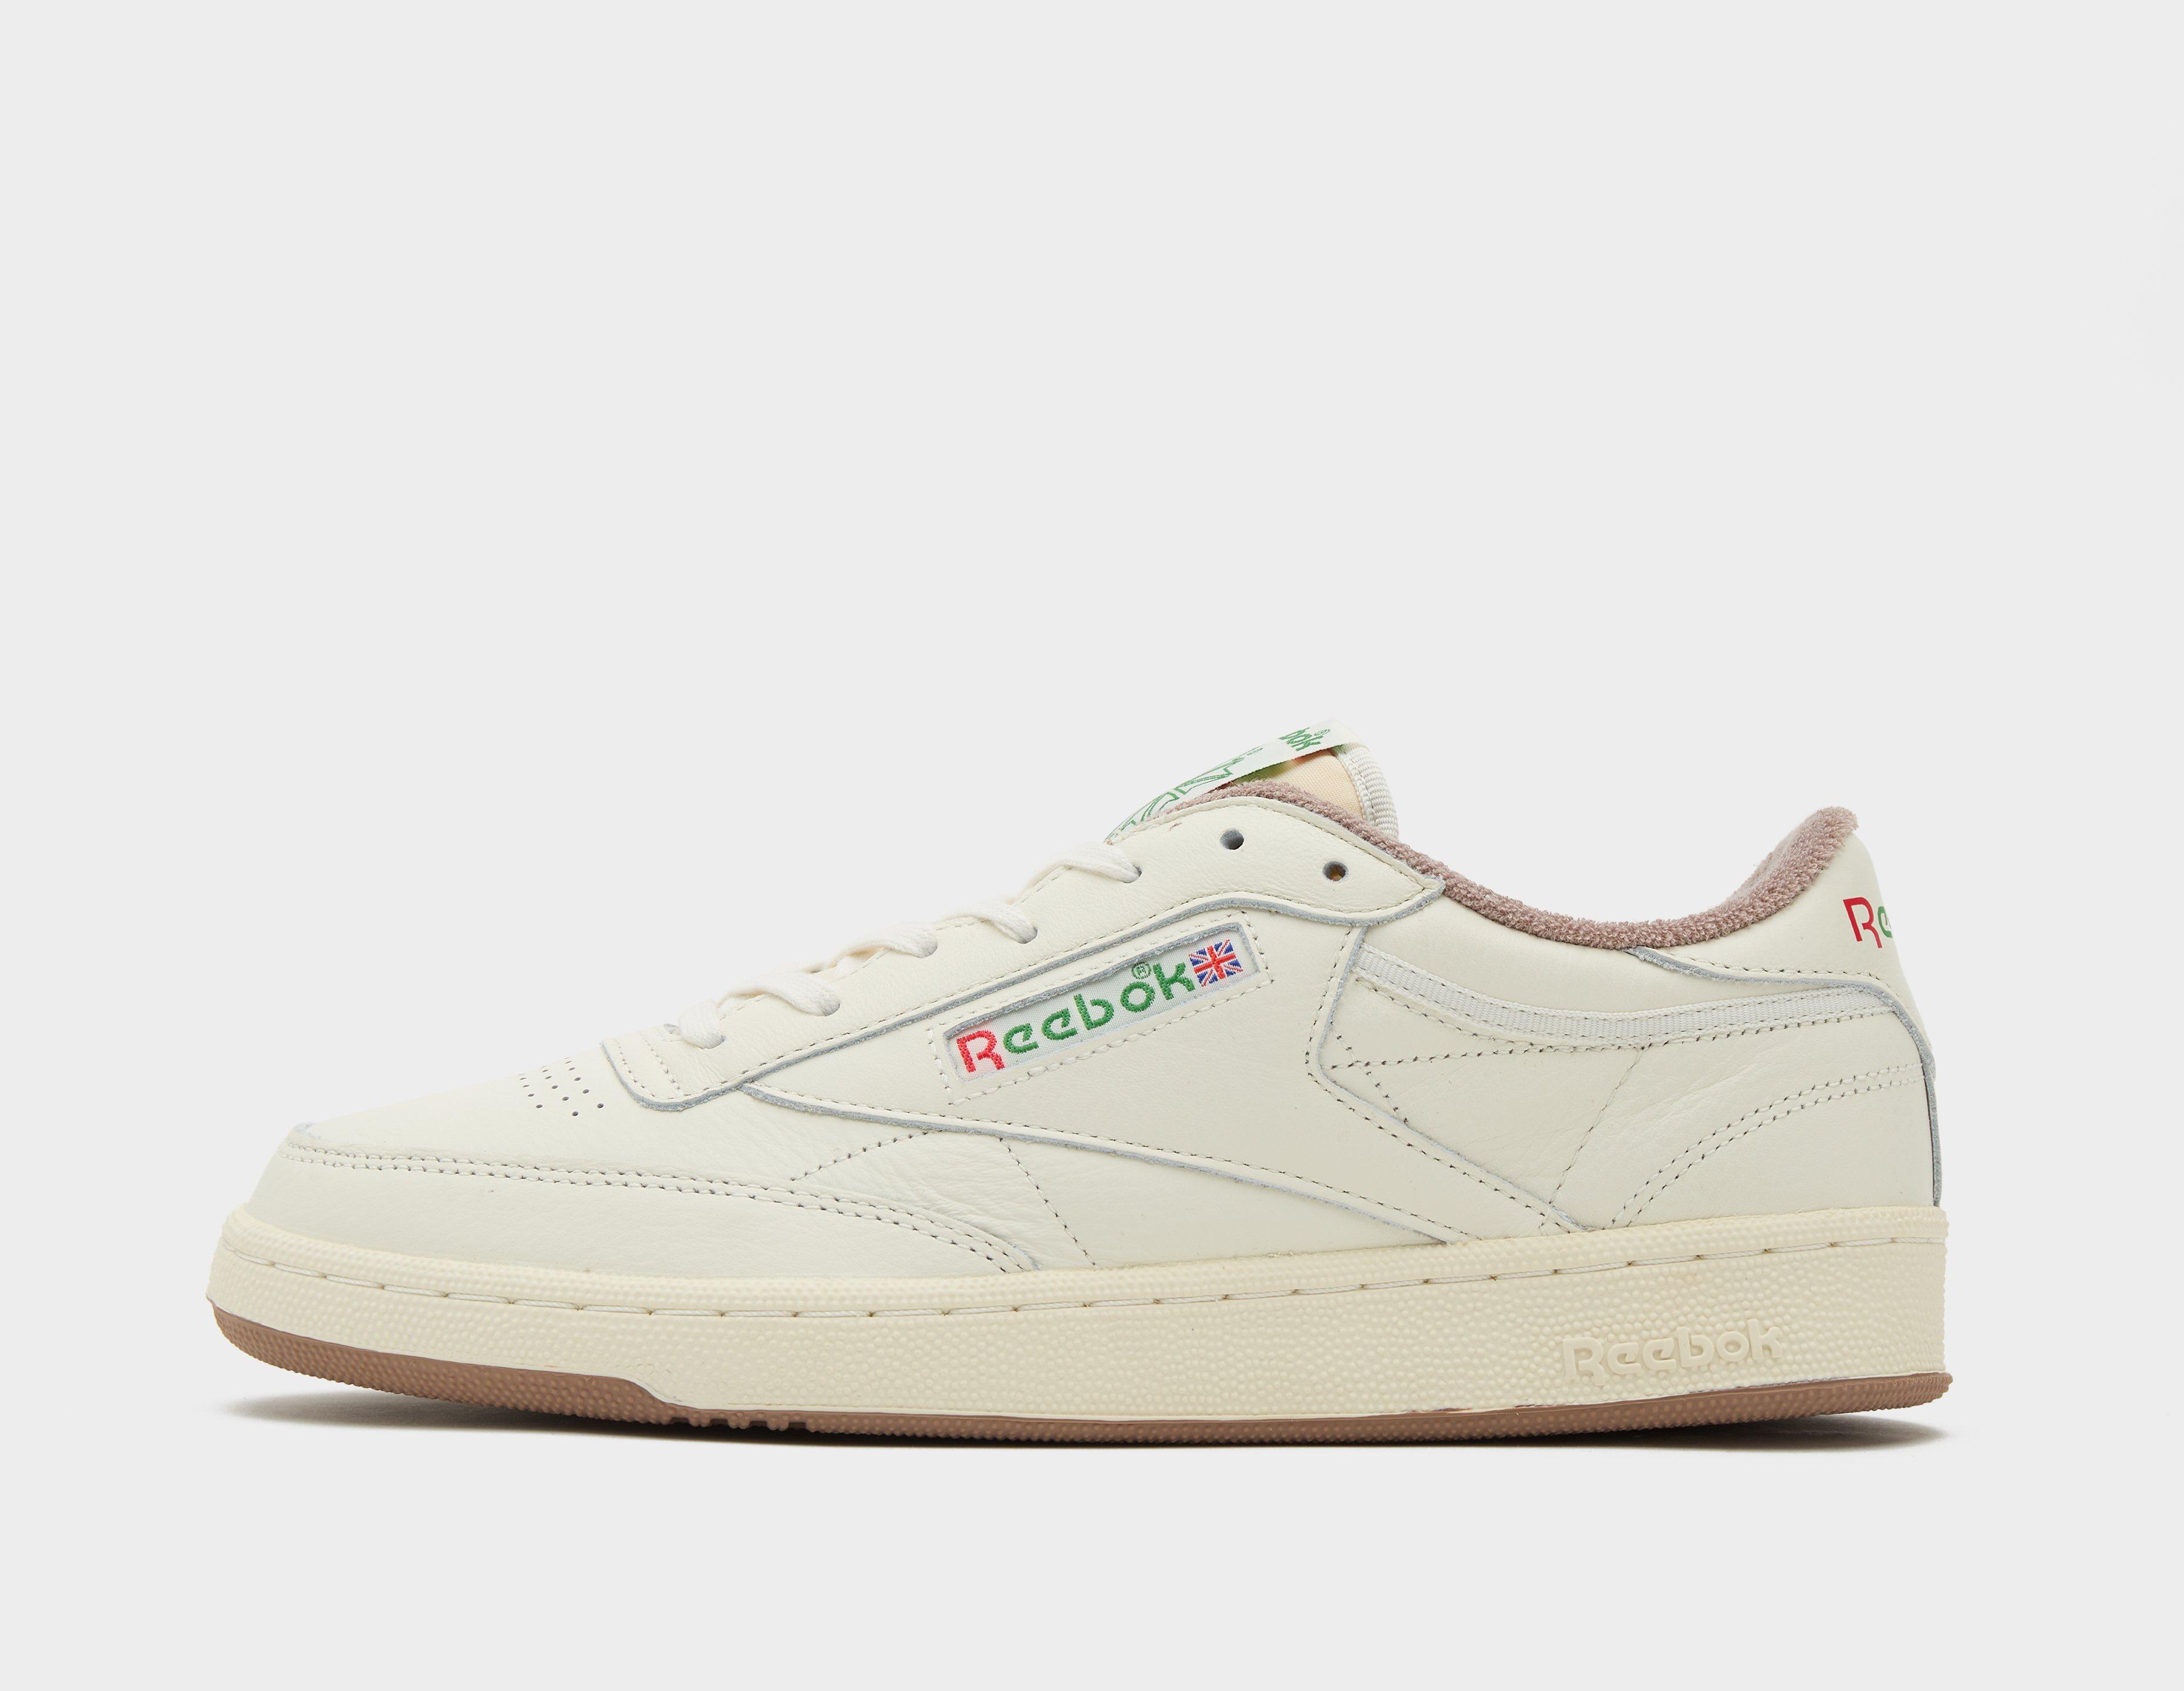 Reebok Club C 85 Shoes Are Editor-loved